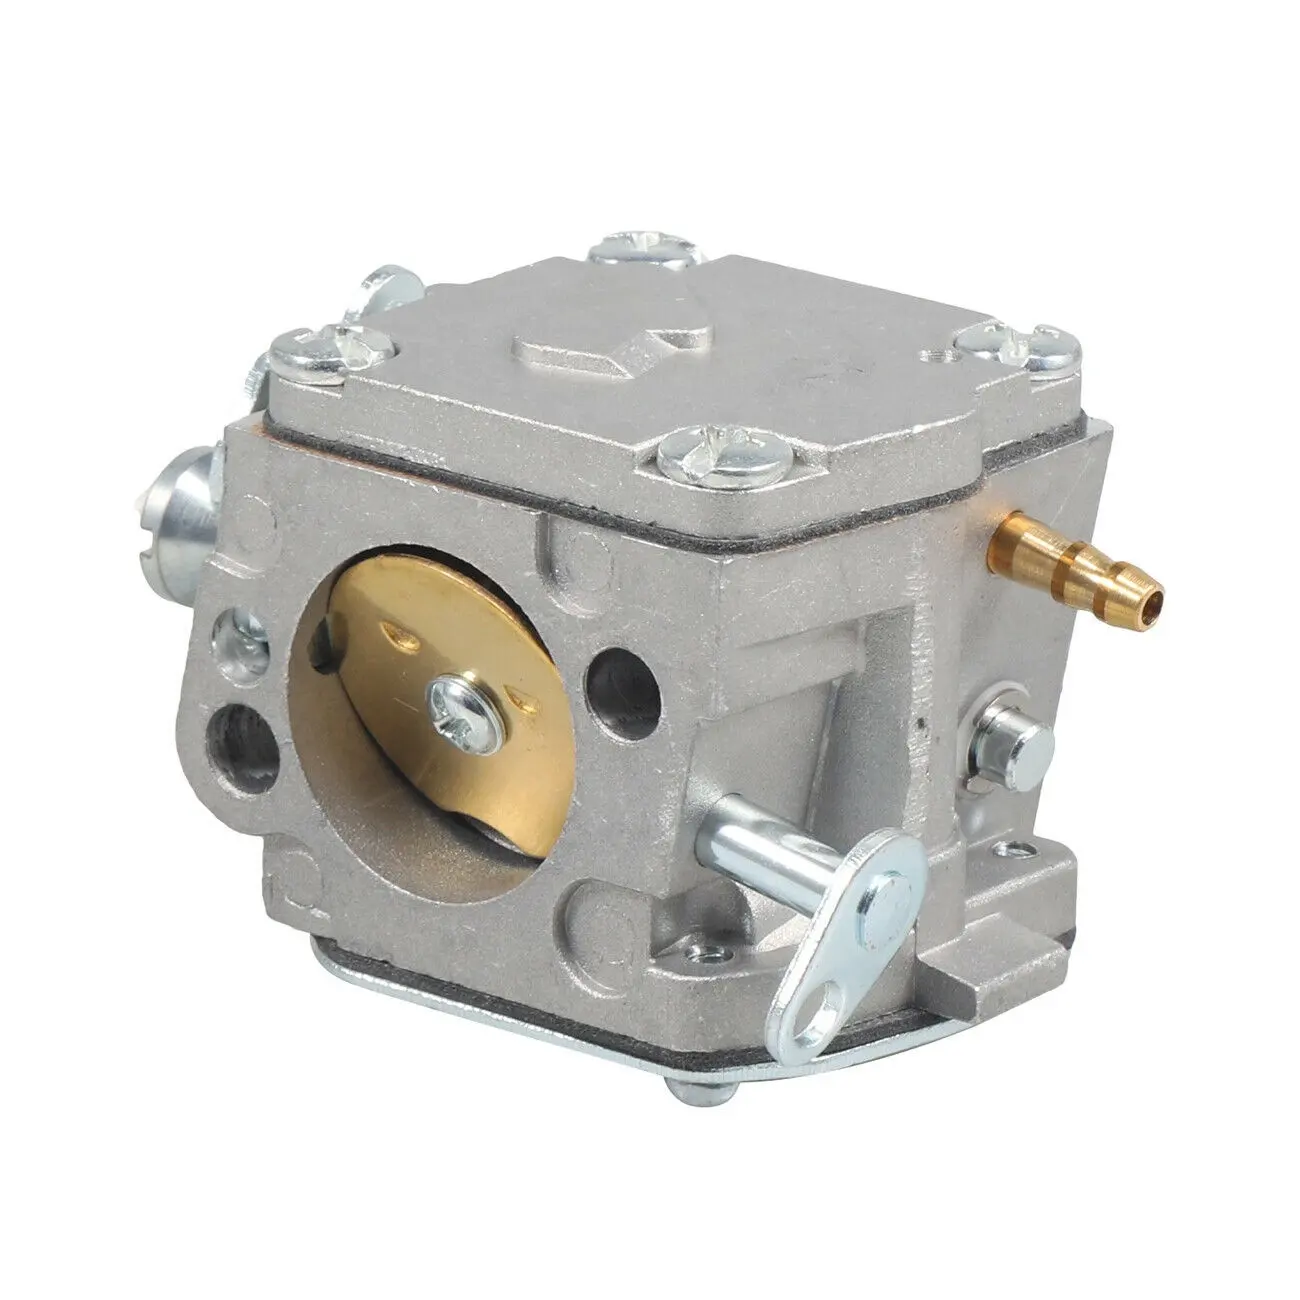 Replacement Carburetor for Husqvarna 61 266 268 272 Chainsaw